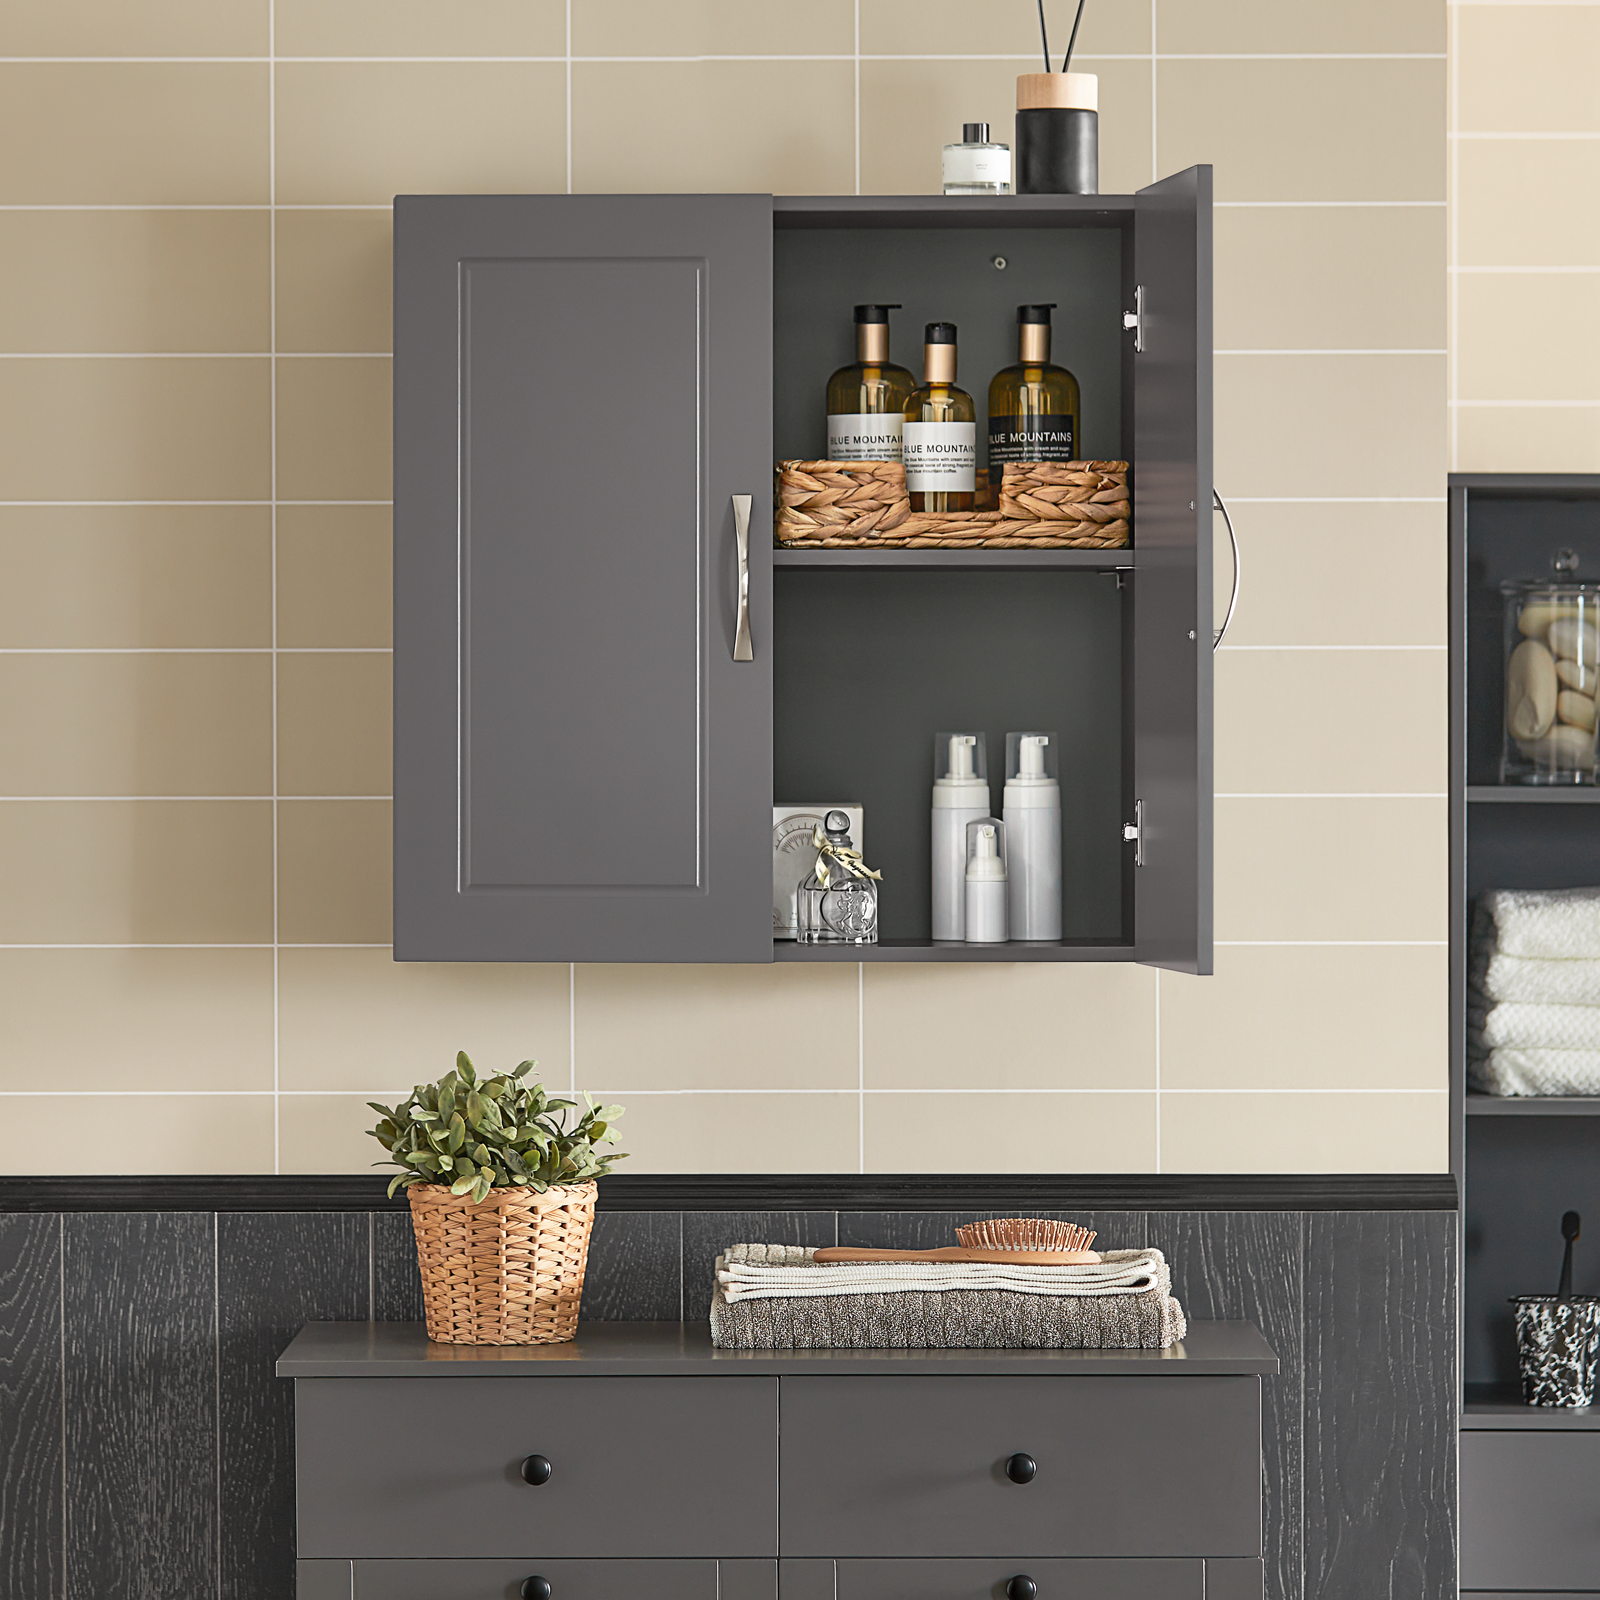 SoBuy FRG231-DG,Wall Storage Cabinet Unit with Double Doors,Kitchen Bathroom Wall Cabinet,Garage or Laundry Room Grey